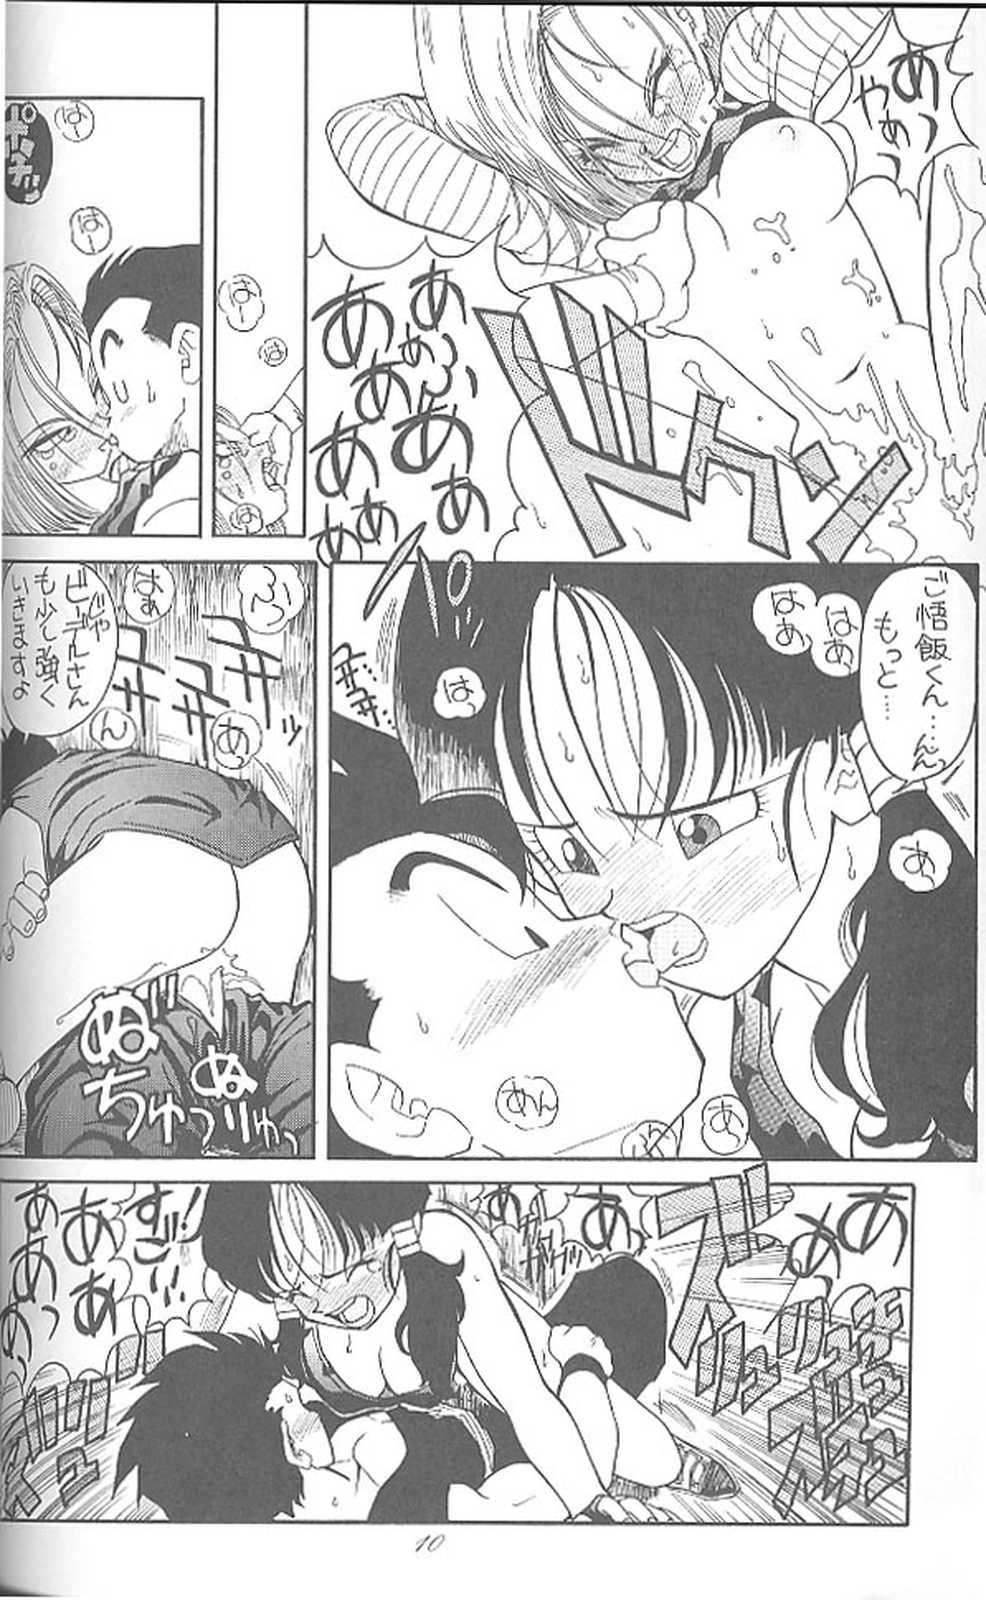 China Haraharatokei vol.4 - Dragon ball z Slayers Dirty pair Ghost sweeper mikami World masterpiece theater Dr. slump Tico of the seven seas Bucetinha - Page 9